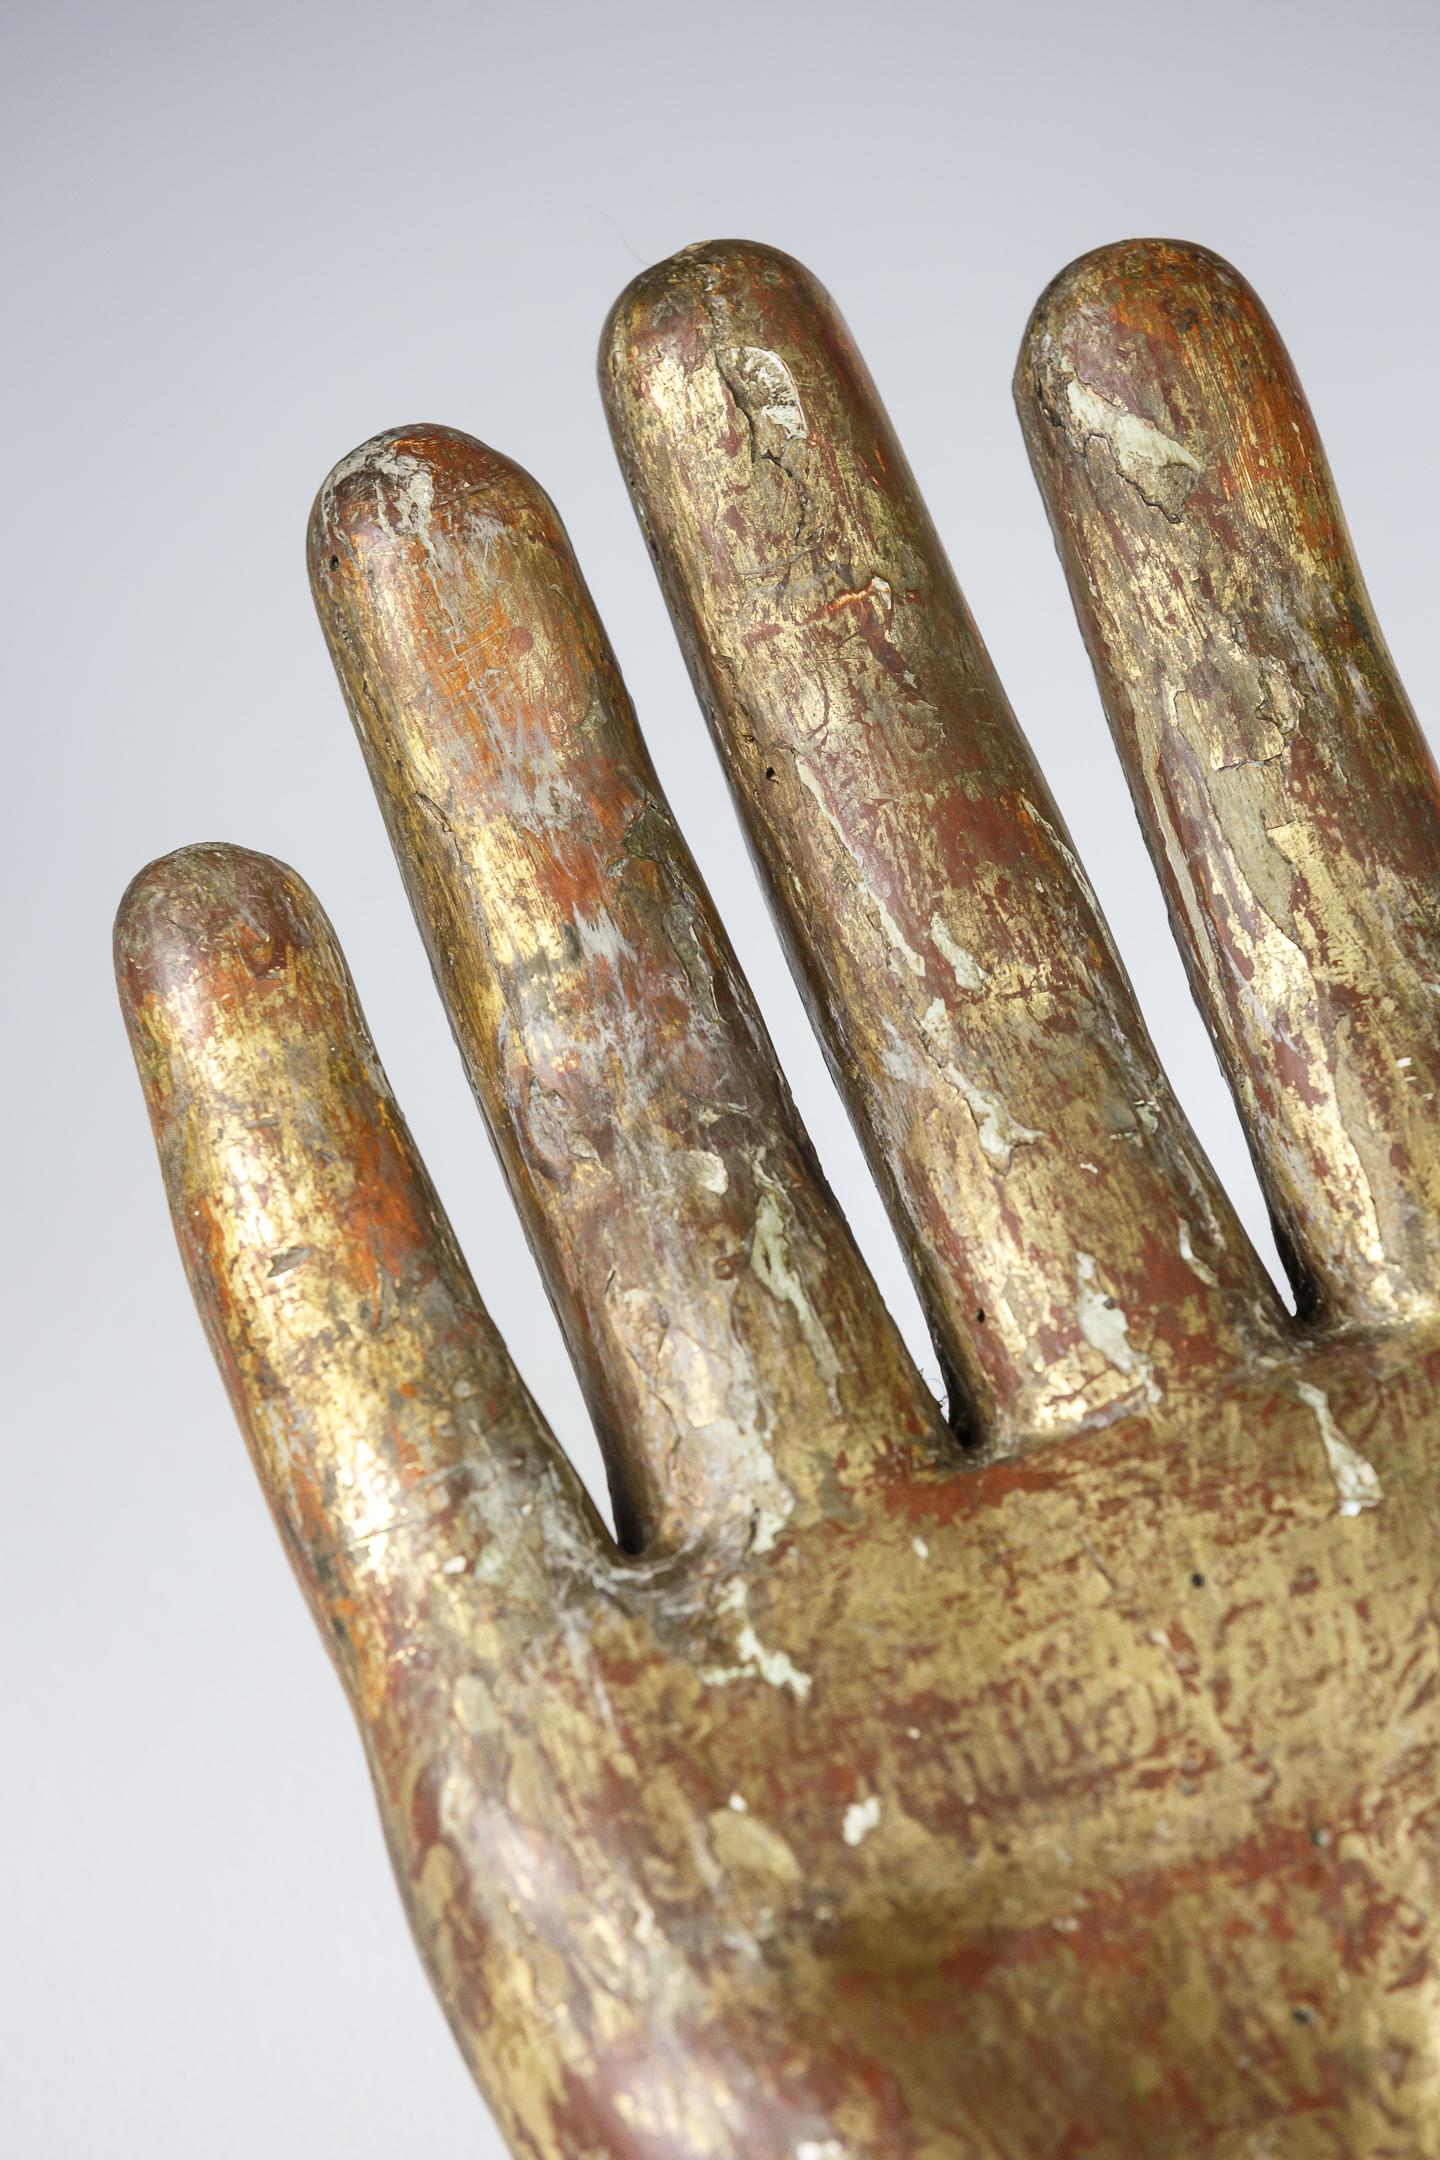 Glove Makers Trade Sign. Carved wood with the original gilded finish, weathered with lots of bole showing through the gilding. 
Original iron fitting to the reverse on the top of the wrist. A later iron fitting has also been added most likely in